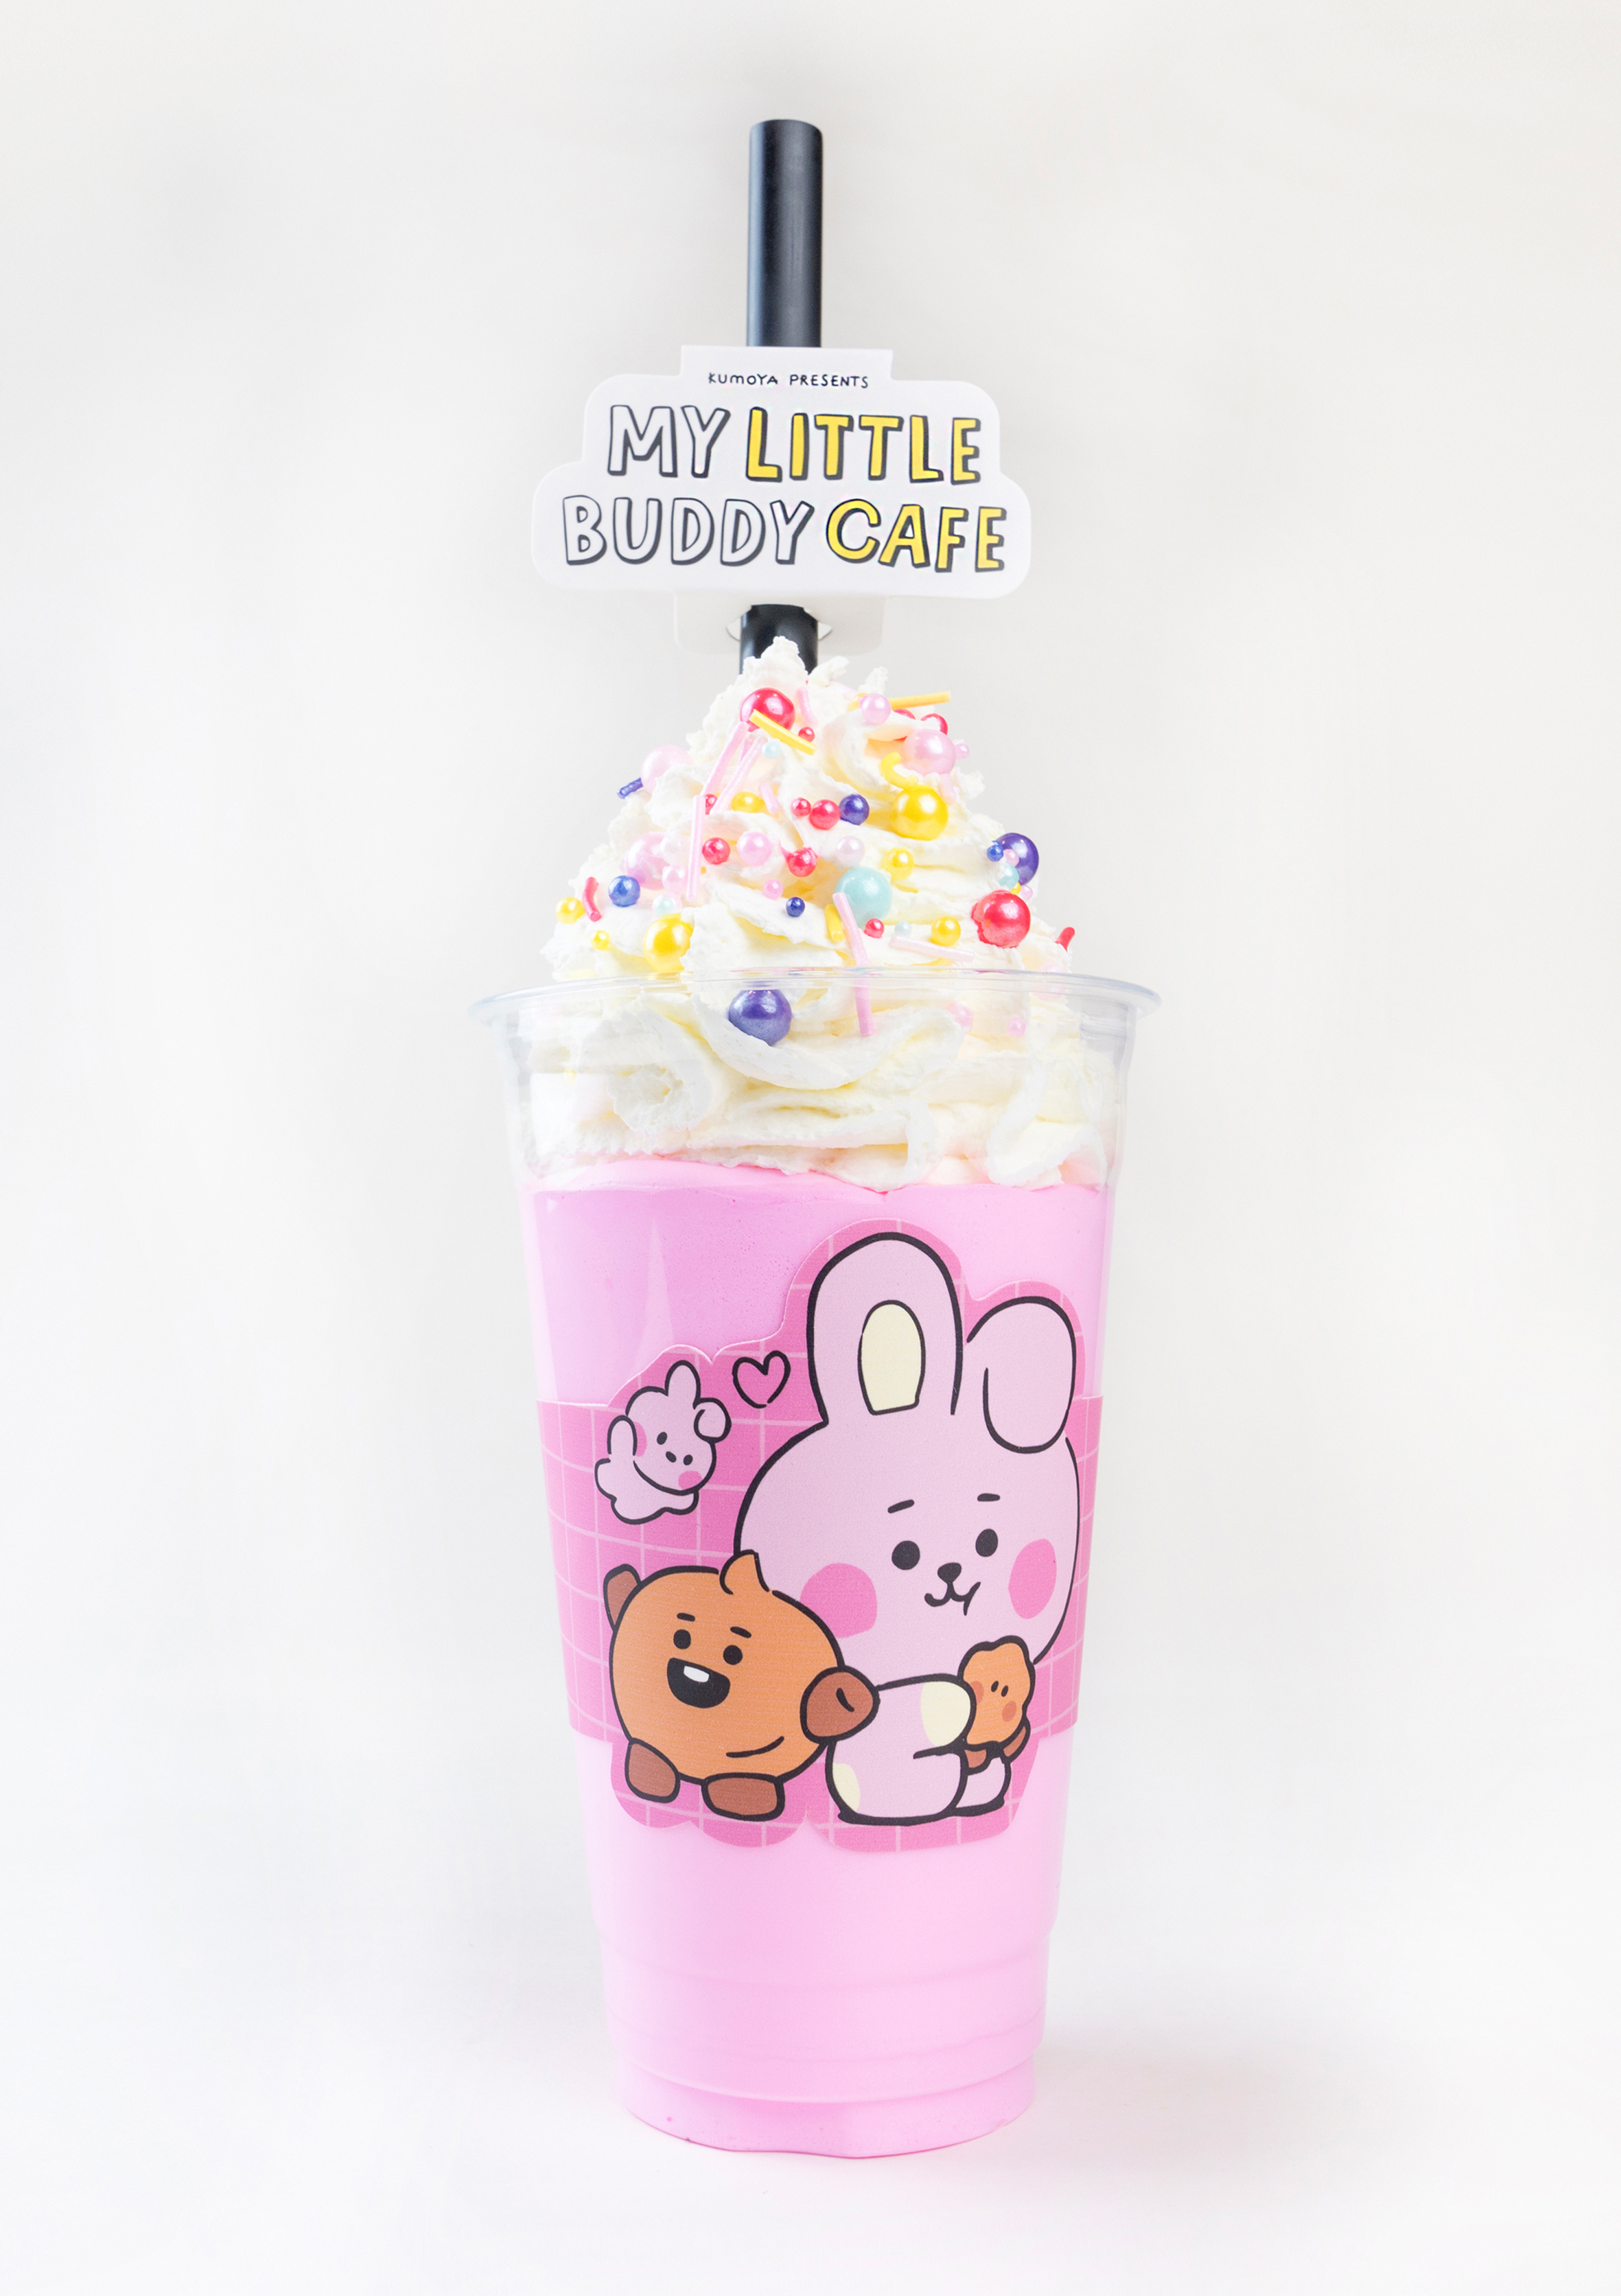 cooky_strawberry_frappe.jpg